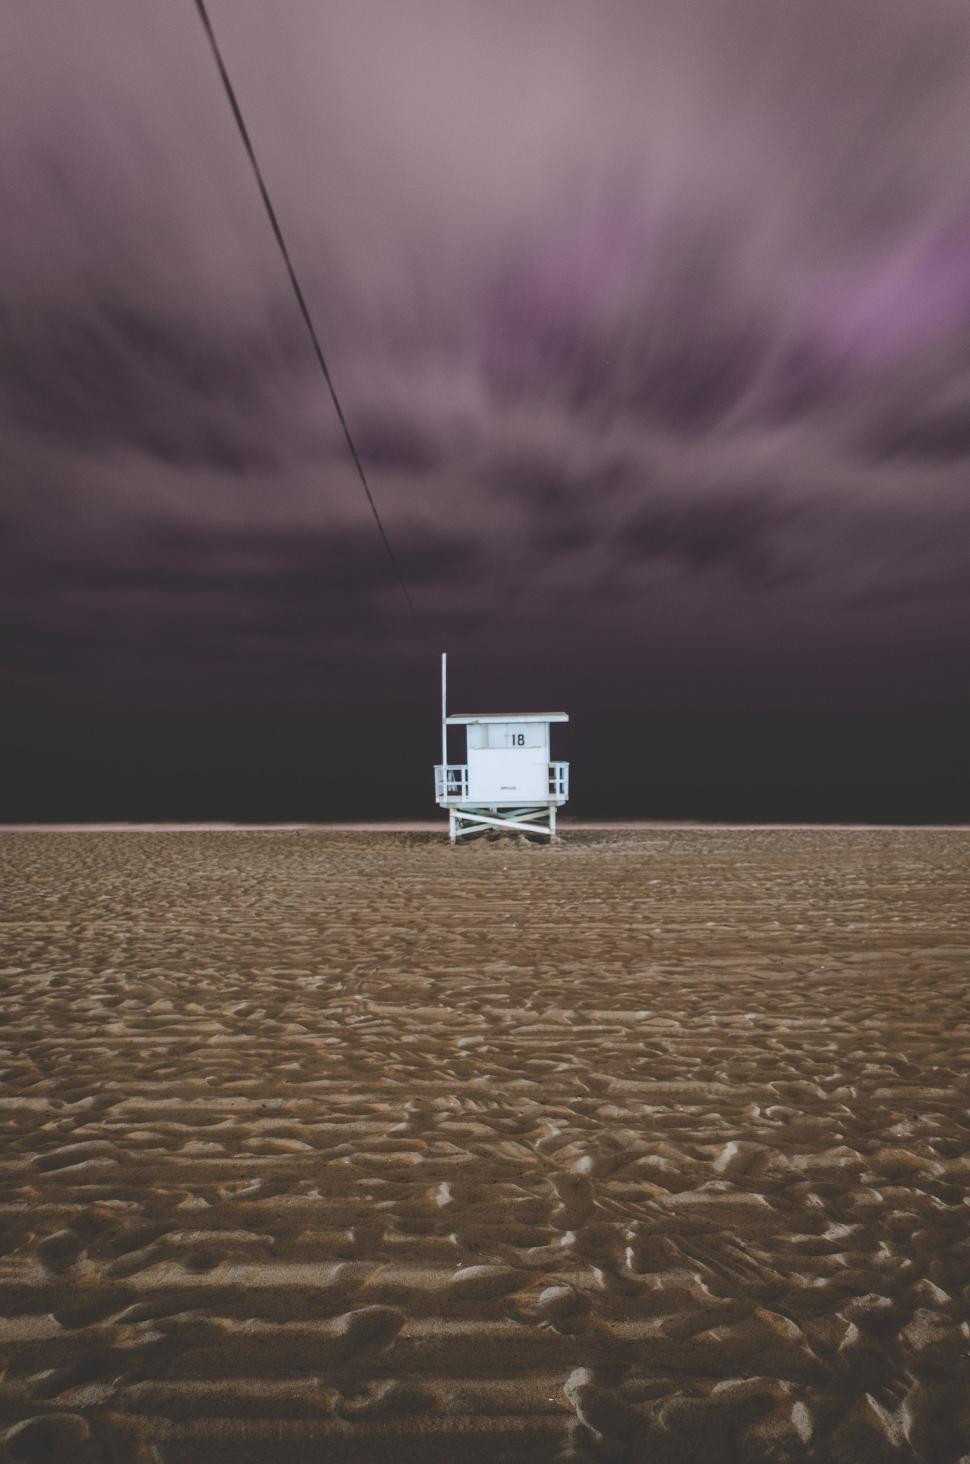 Free Image of Lifeguard Chair on Beach Under Cloudy Sky 